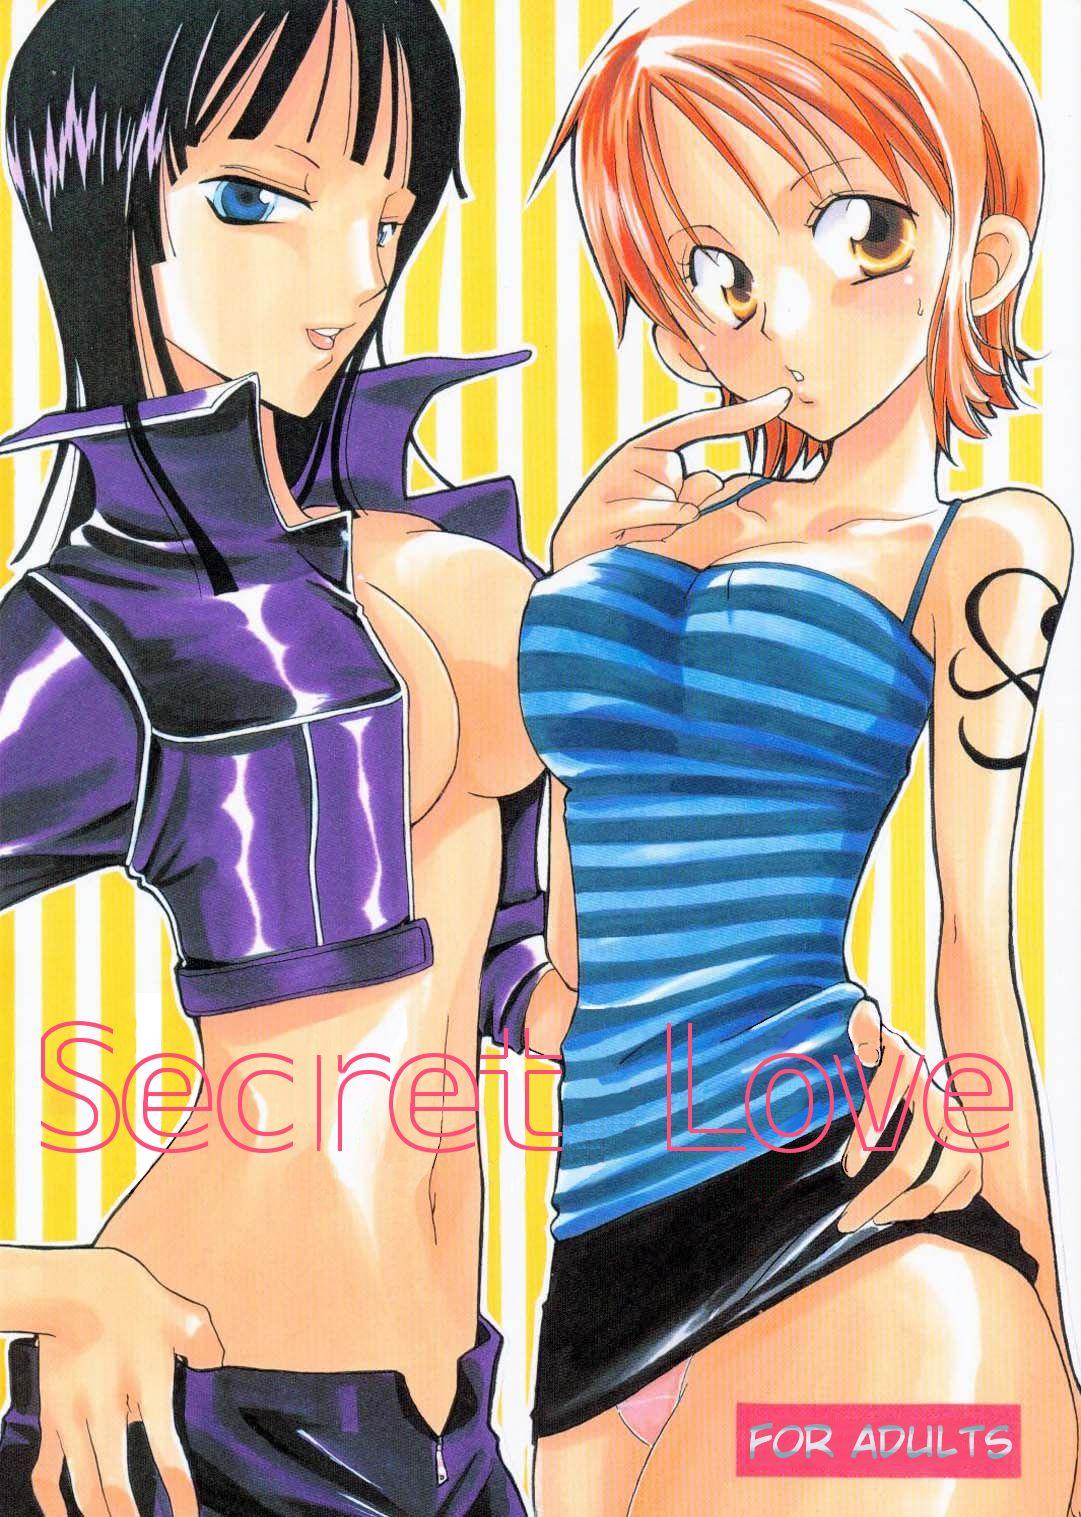 Gay Blondhair Secret Love - One piece Gay Fucking - Page 1